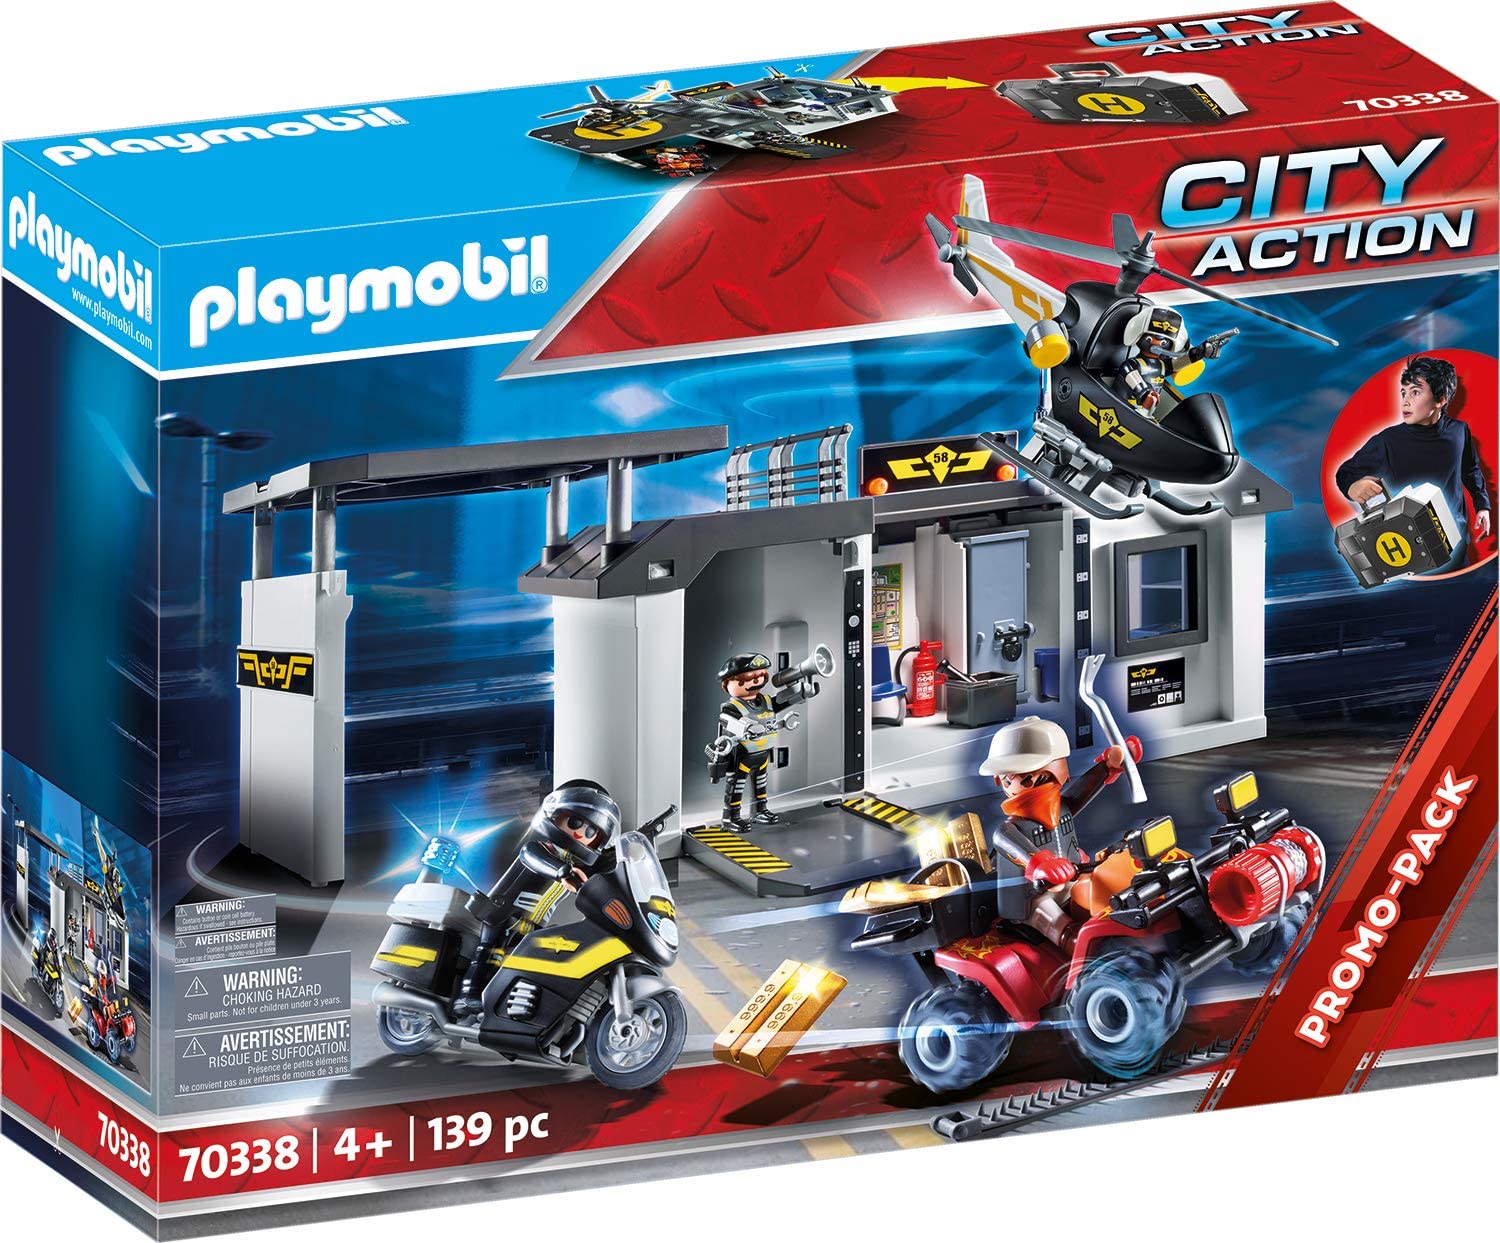 Playmobil City Action 70338, Large Take-Away Corner Centre With Light Effec